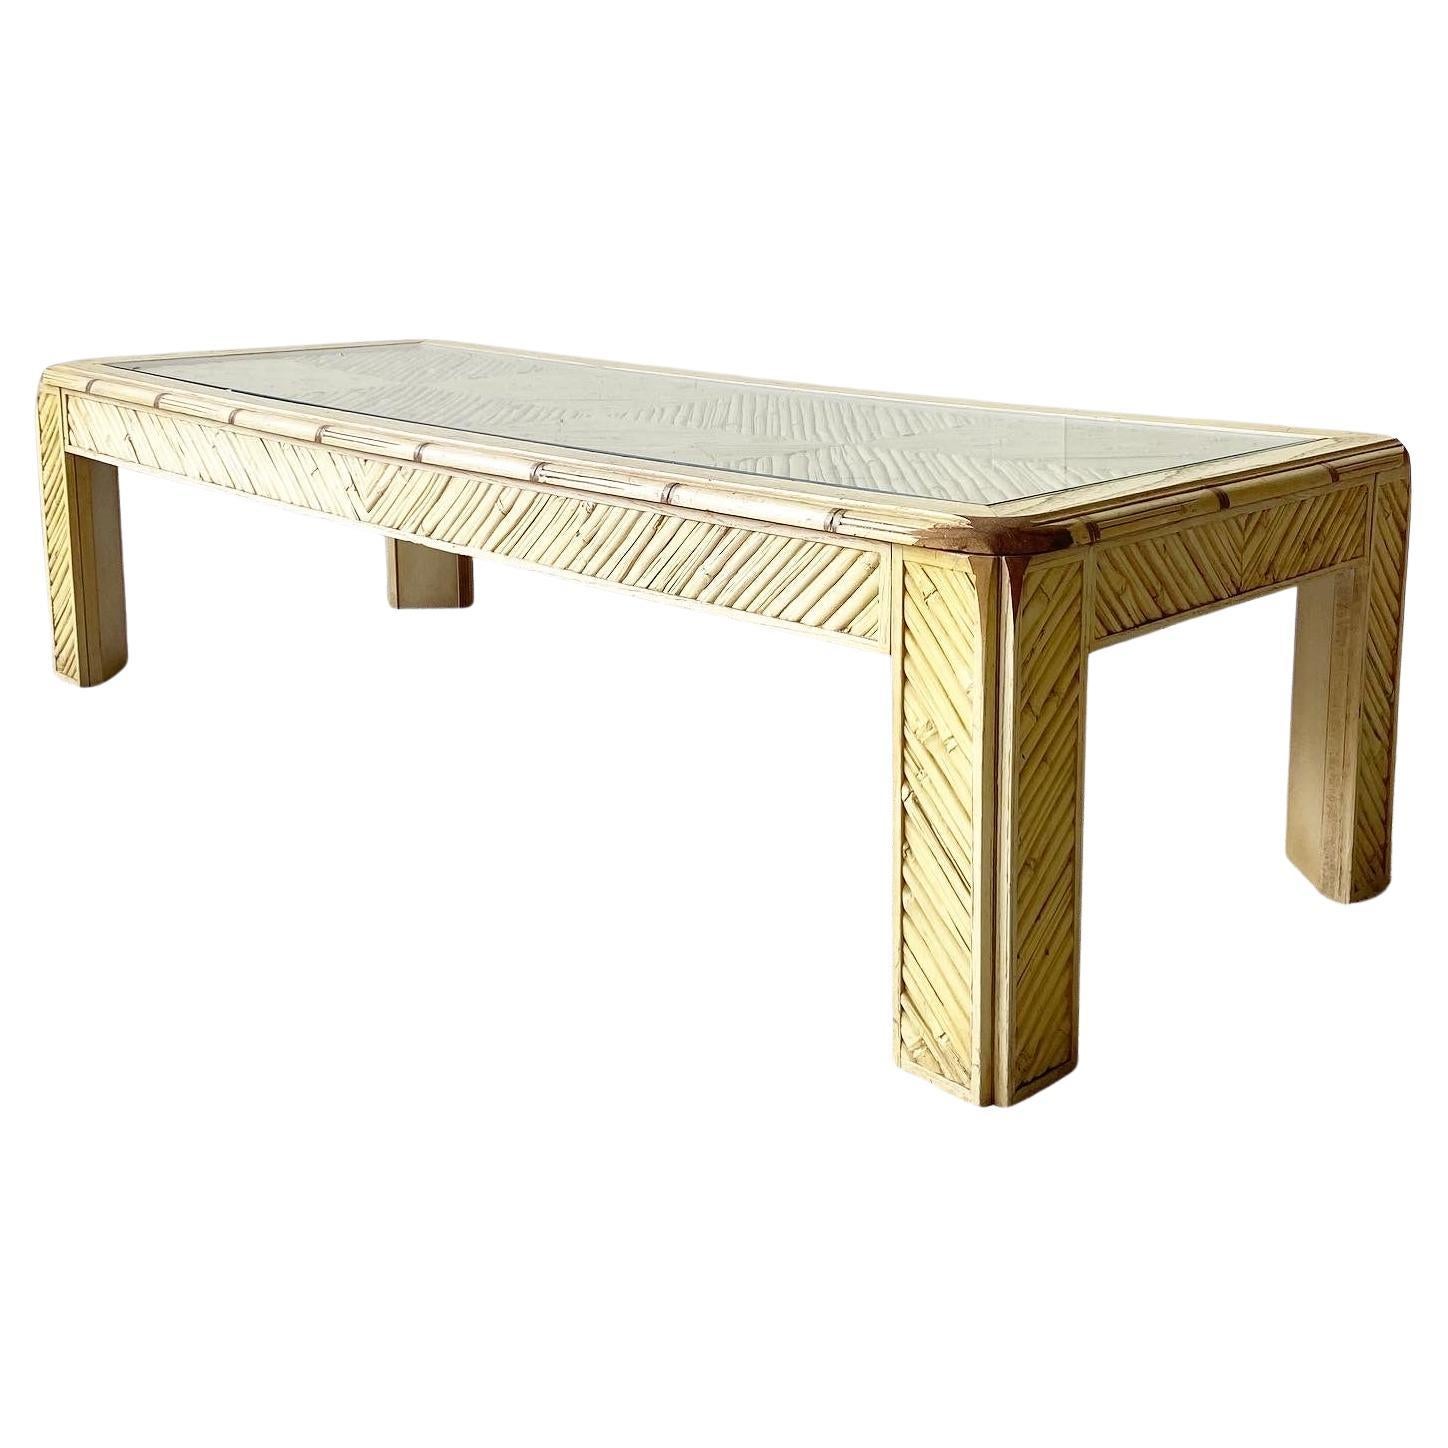 Vintage Boho Chic Faux Bamboo and Reed Glass Top Coffee Table For Sale